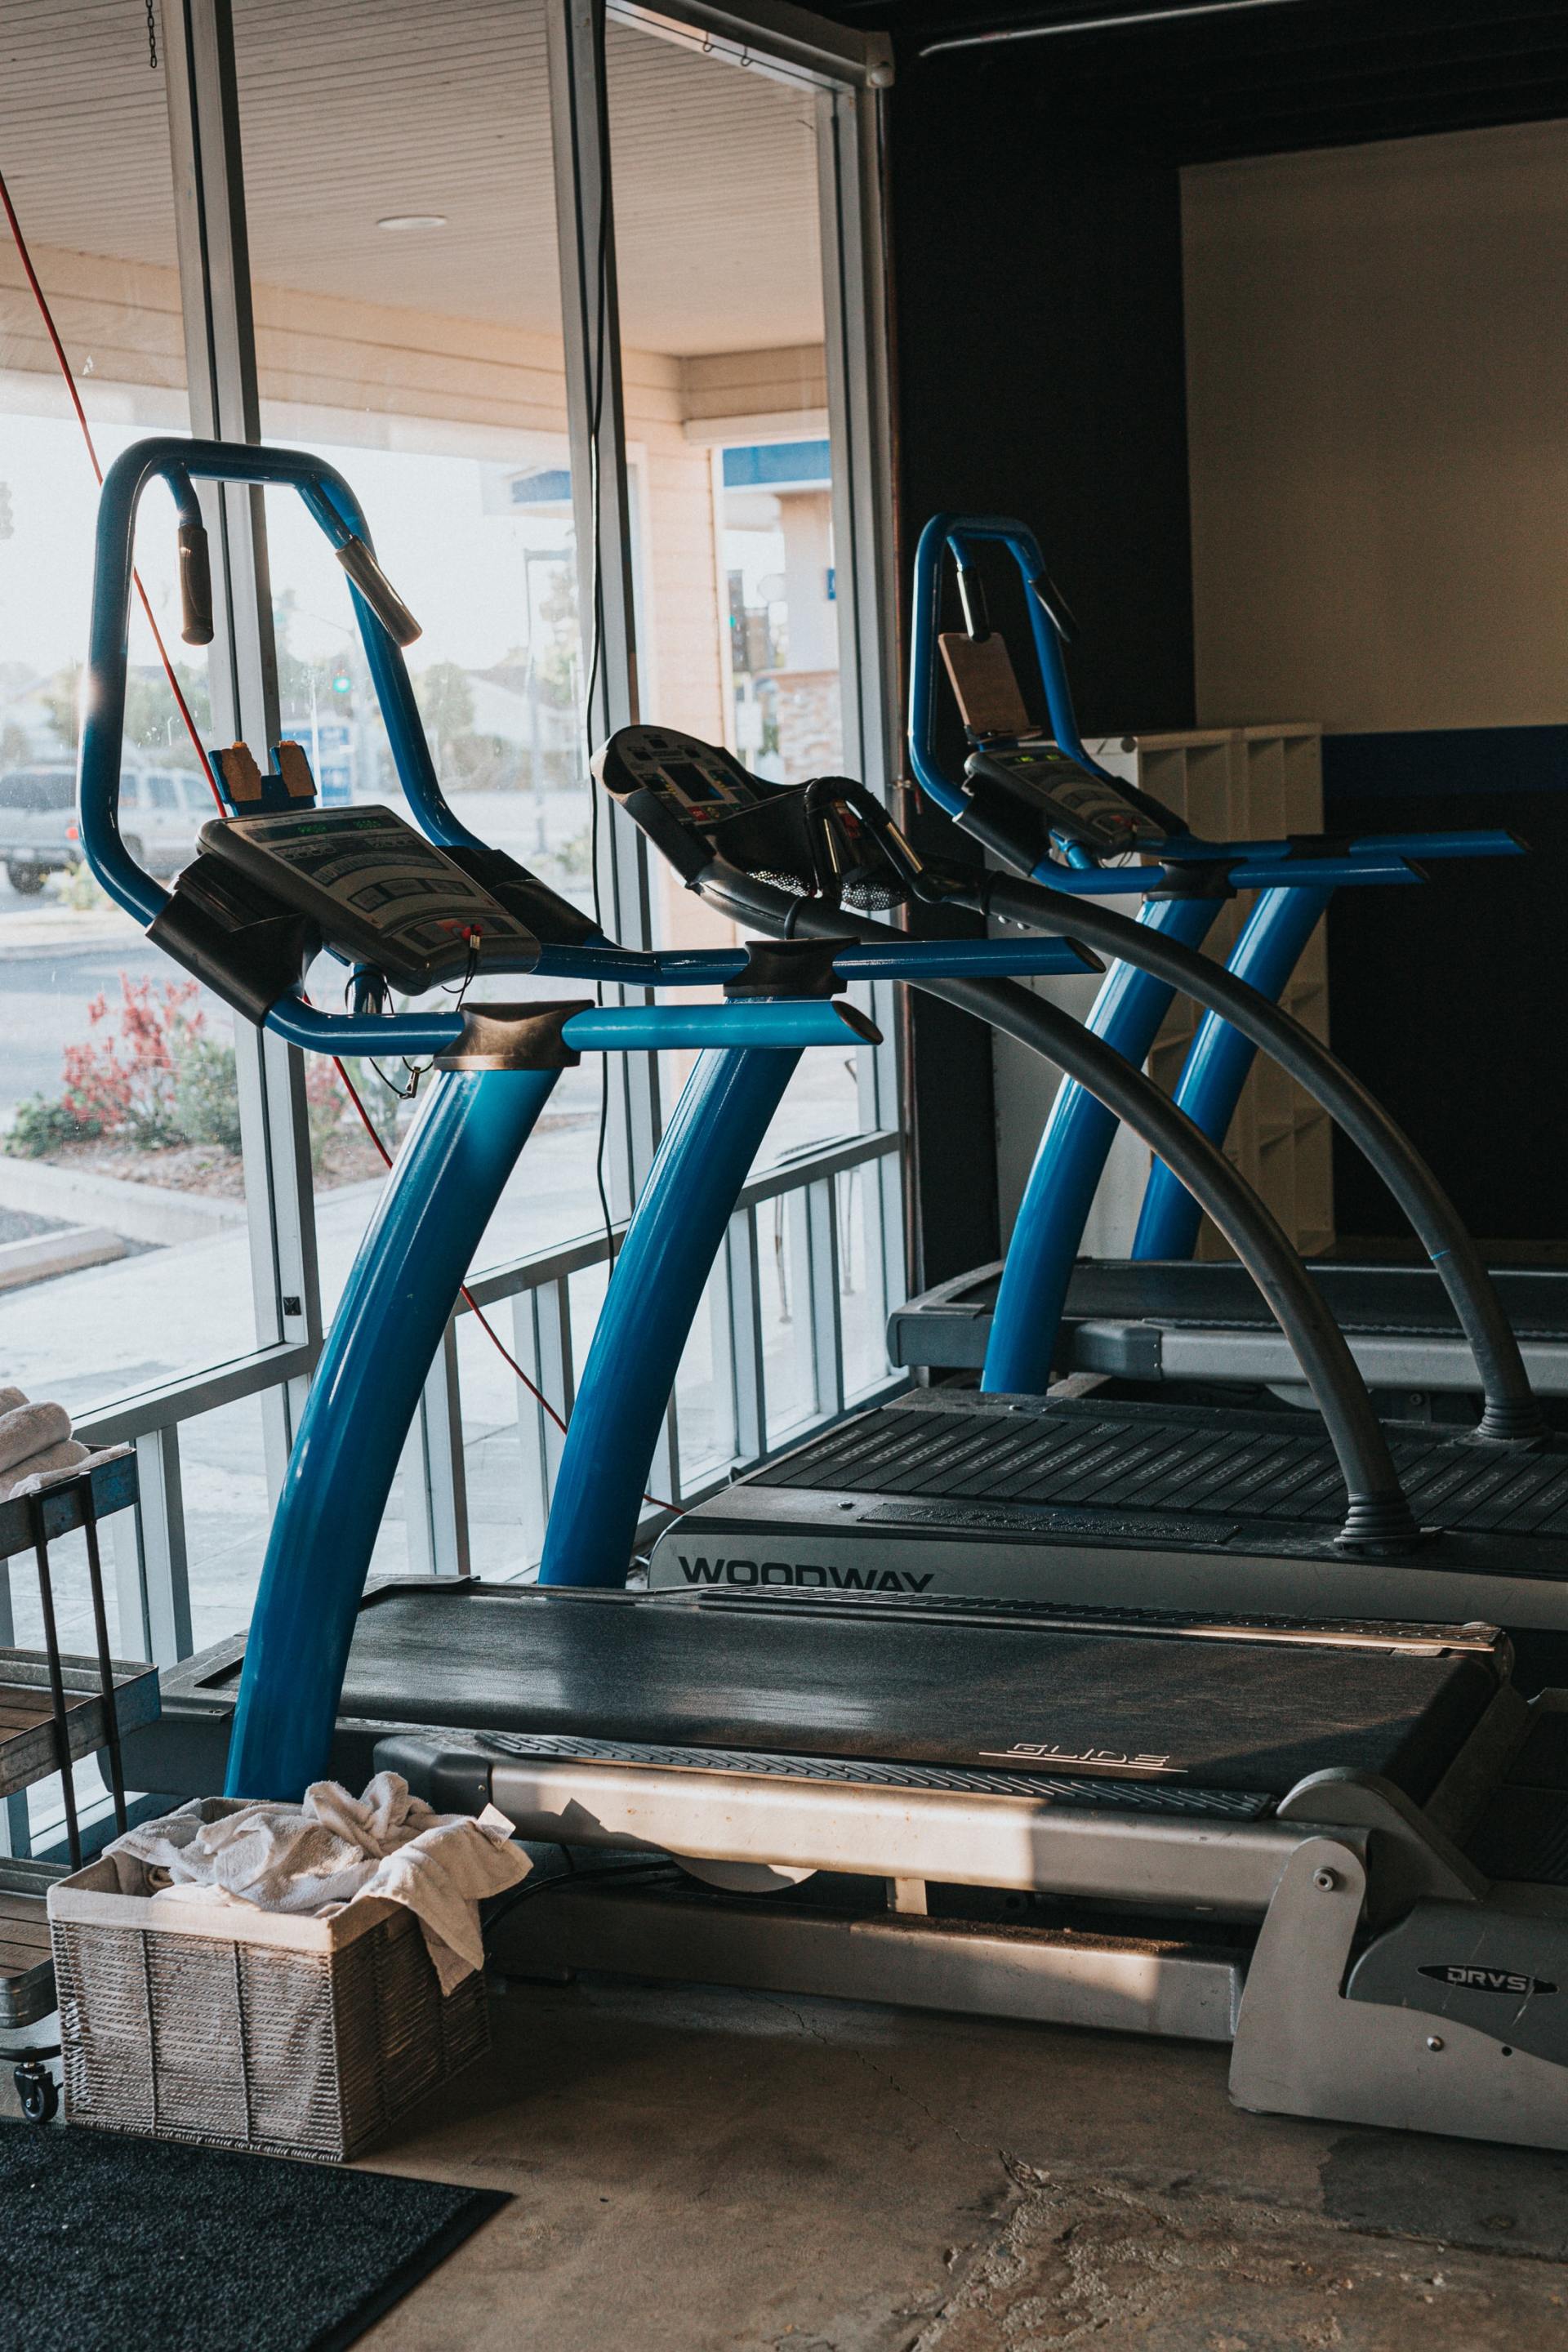 A row of treadmills in a gym next to a window.